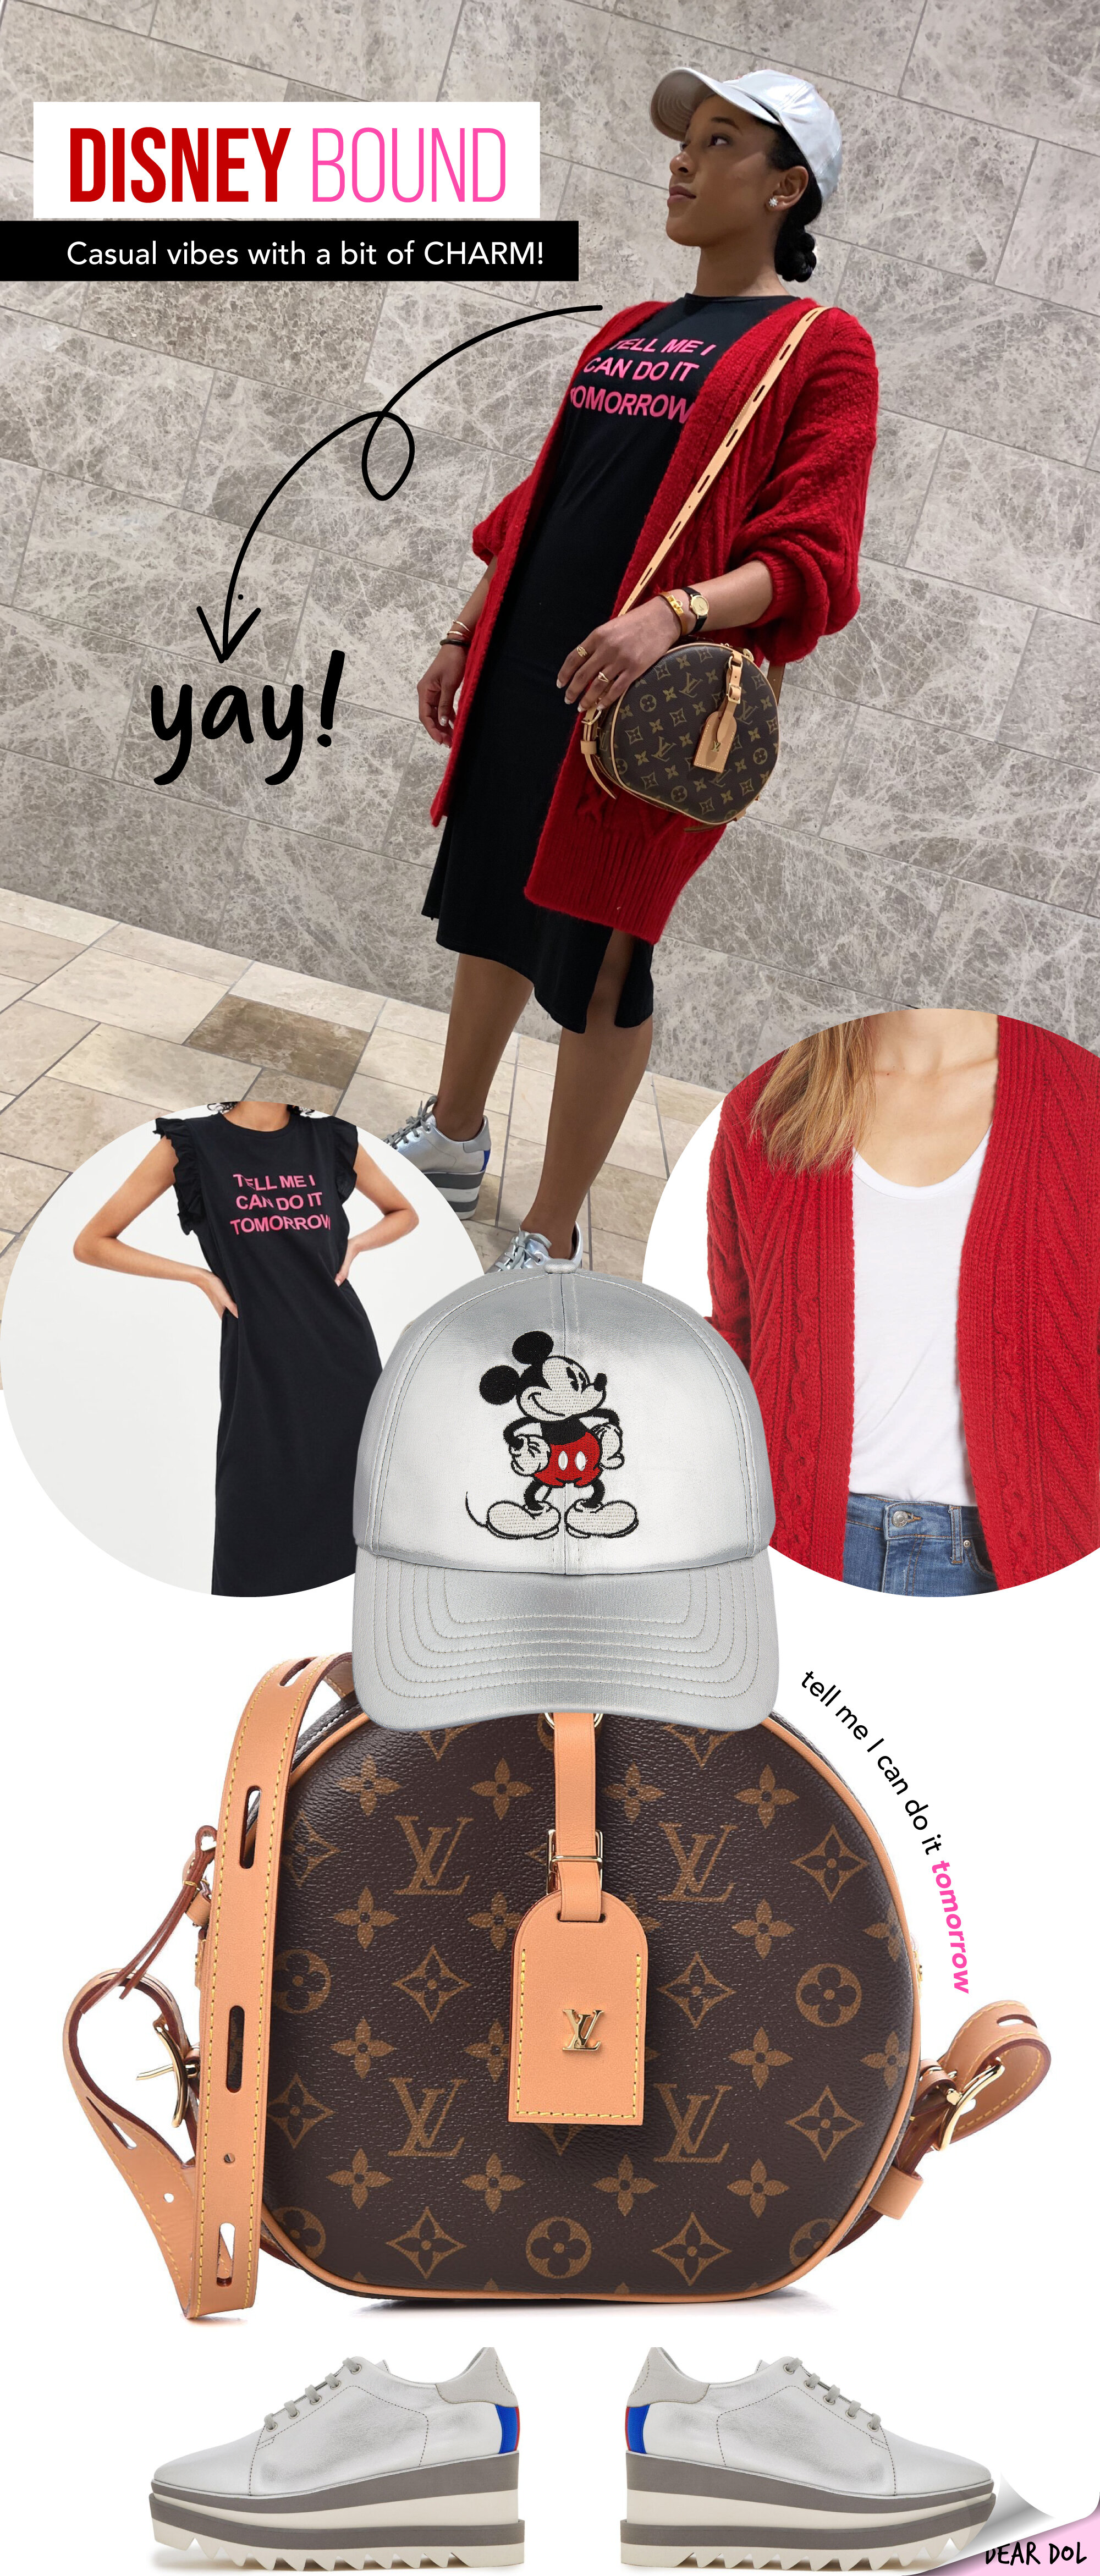 AS SEEN ON ME: A Disney Bound Outfit featuring a Slogan T-shirt